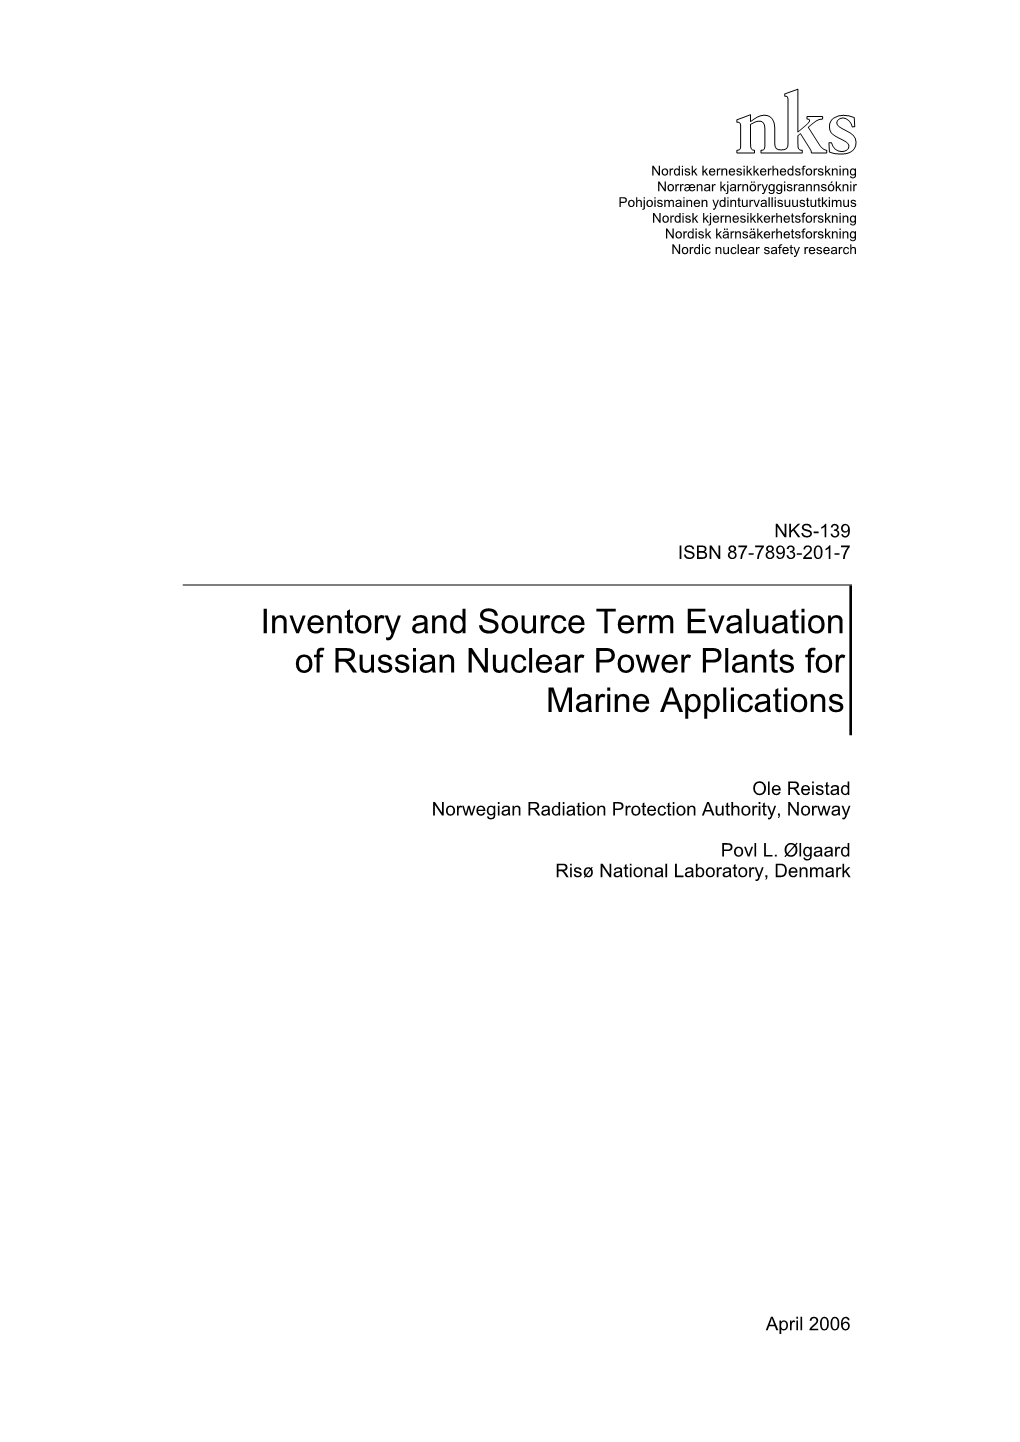 Inventory and Source Term Evaluation of Russian Nuclear Power Plants for Marine Applications